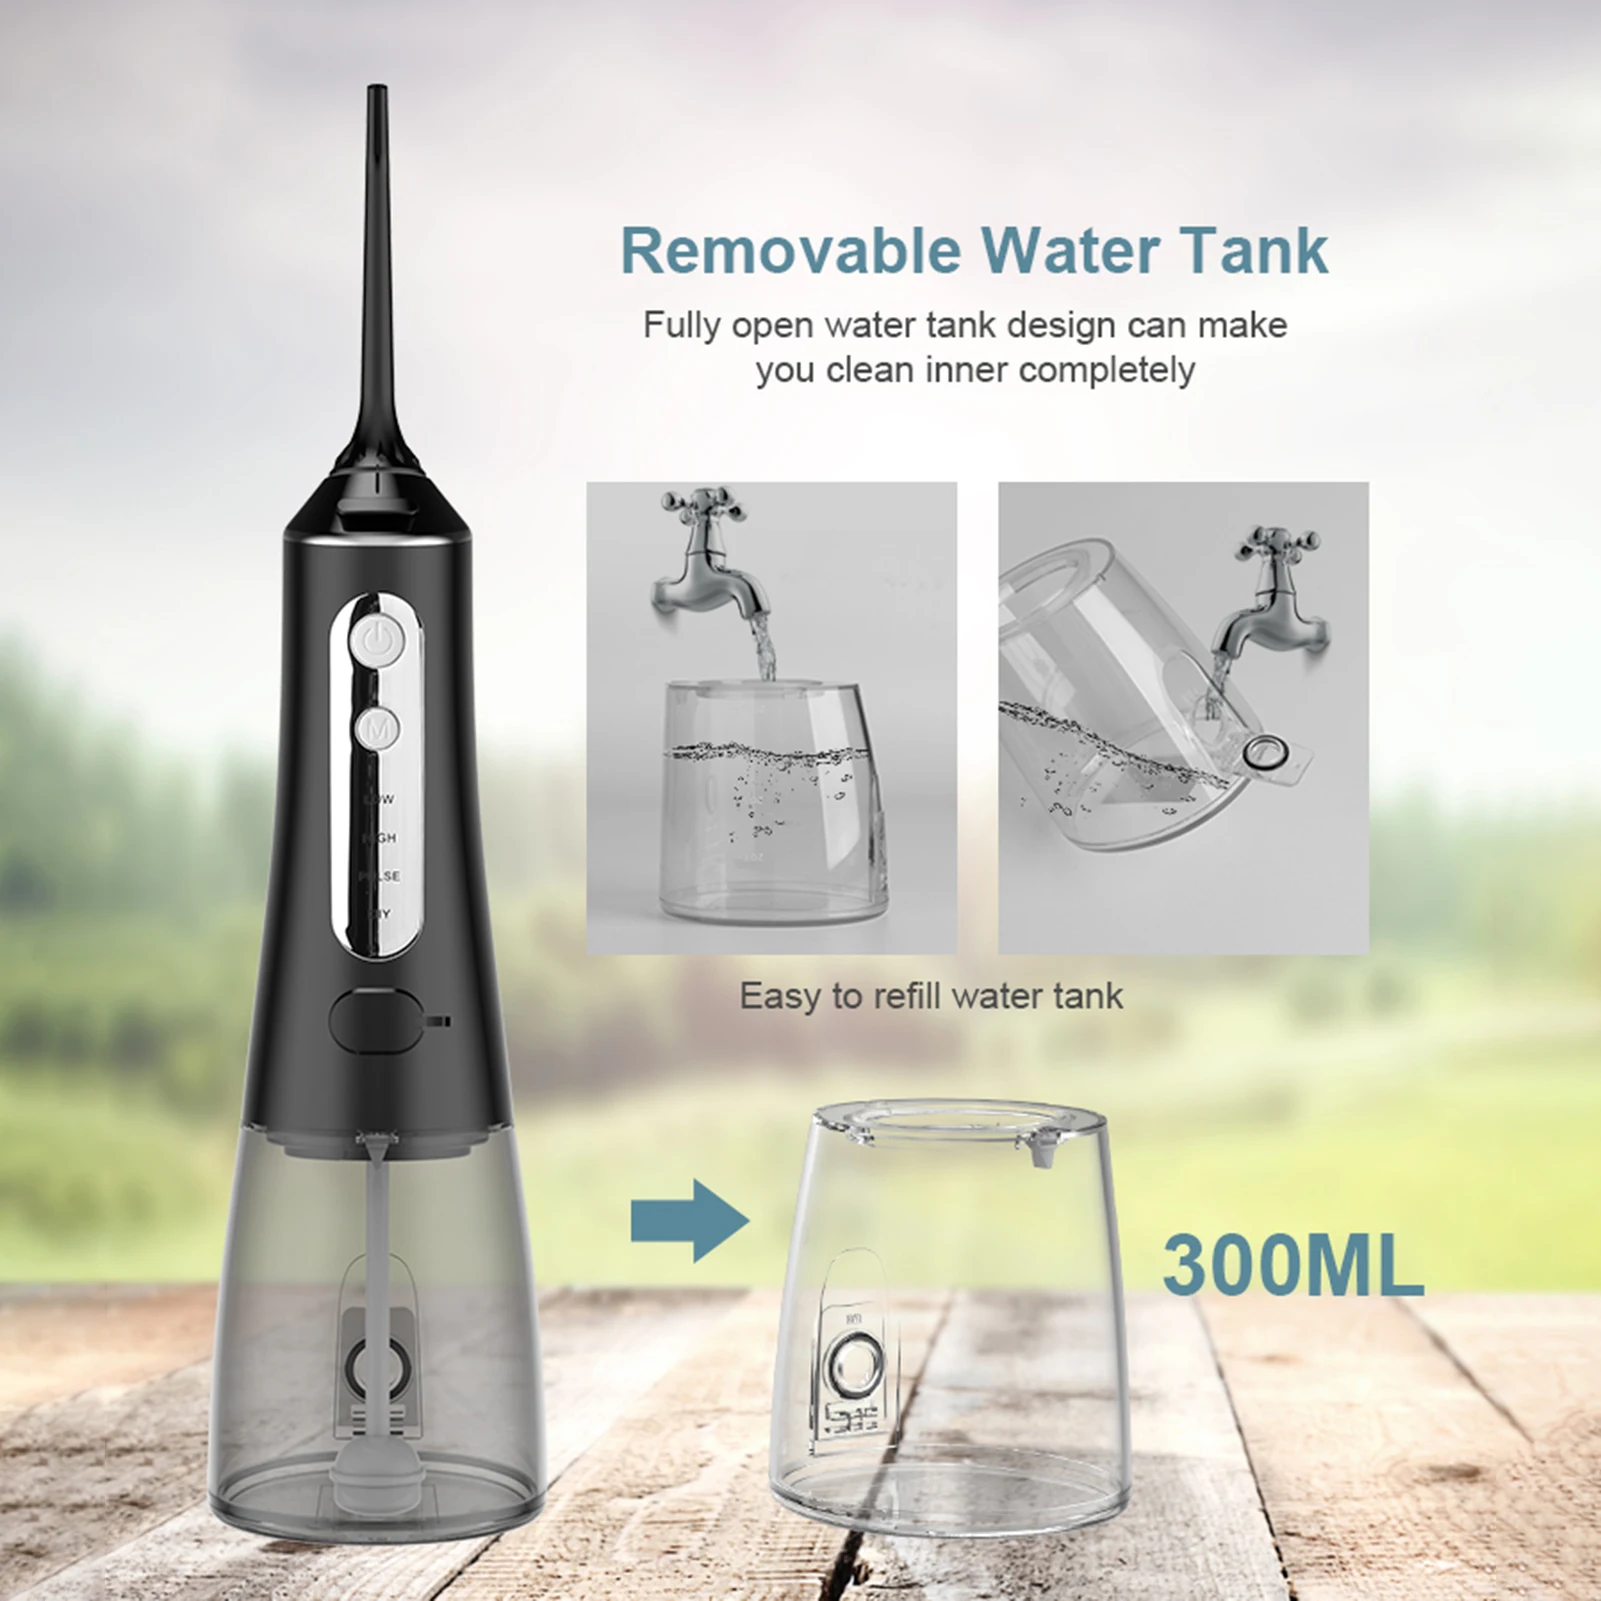 Ntal 300ml water tank ipx7 waterproof portable rechargeable teeth cleaner mouth washing thumb200